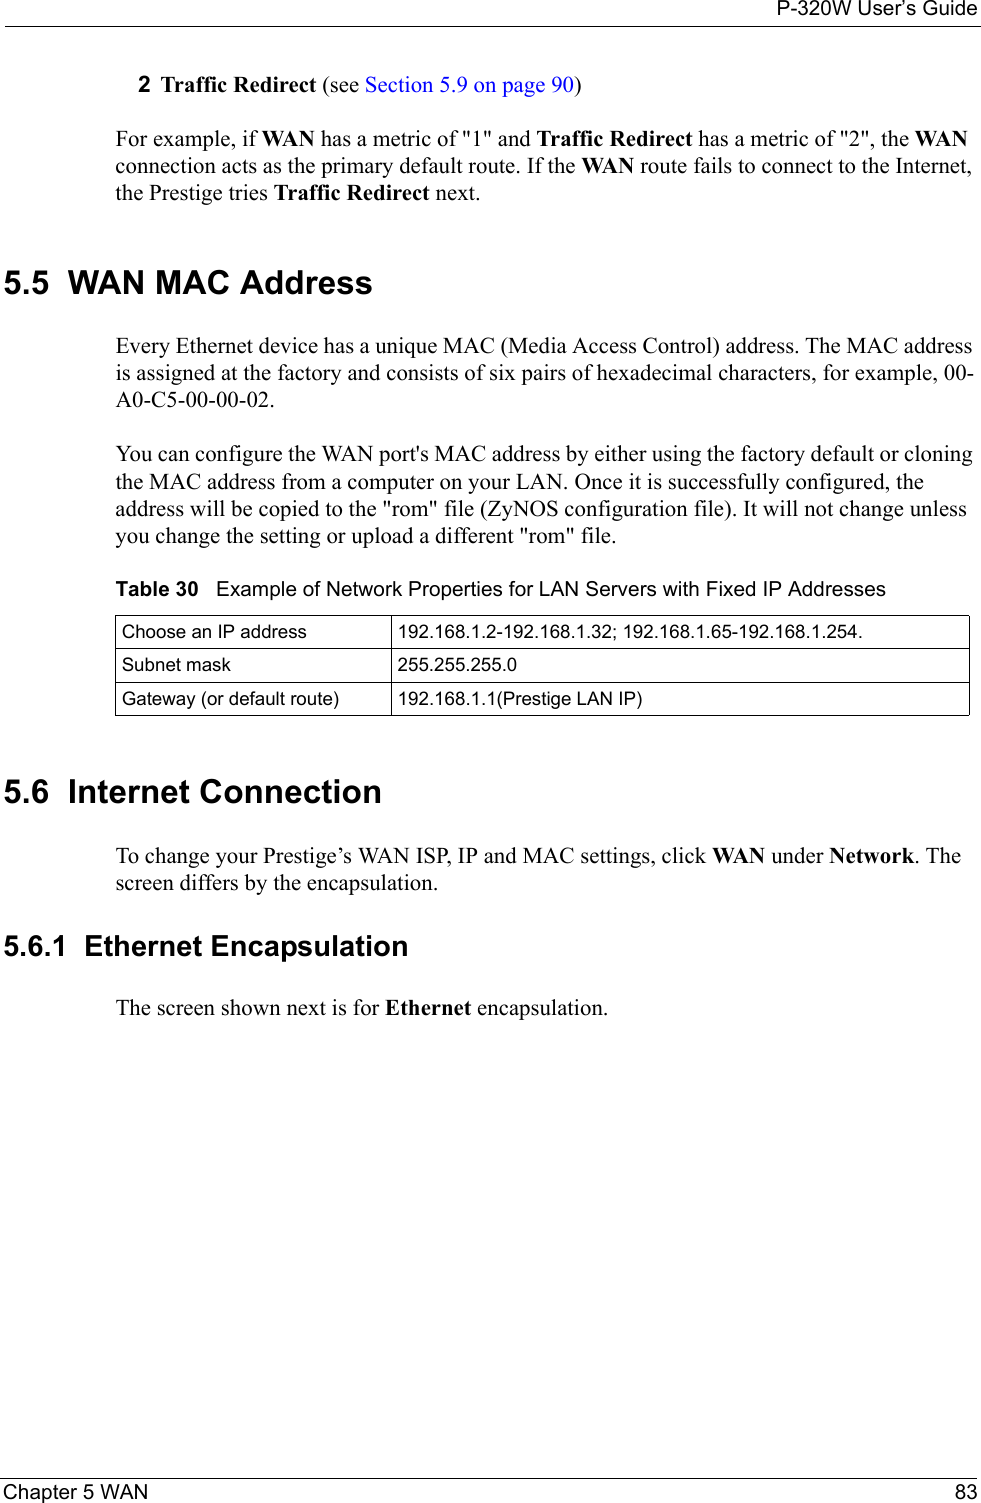 P-320W User’s GuideChapter 5 WAN 832Traffic Redirect (see Section 5.9 on page 90)For example, if WA N  has a metric of &quot;1&quot; and Traffic Redirect has a metric of &quot;2&quot;, the WA N  connection acts as the primary default route. If the WA N  route fails to connect to the Internet, the Prestige tries Traffic Redirect next.5.5  WAN MAC AddressEvery Ethernet device has a unique MAC (Media Access Control) address. The MAC address is assigned at the factory and consists of six pairs of hexadecimal characters, for example, 00-A0-C5-00-00-02.You can configure the WAN port&apos;s MAC address by either using the factory default or cloning the MAC address from a computer on your LAN. Once it is successfully configured, the address will be copied to the &quot;rom&quot; file (ZyNOS configuration file). It will not change unless you change the setting or upload a different &quot;rom&quot; file.Table 30   Example of Network Properties for LAN Servers with Fixed IP AddressesChoose an IP address 192.168.1.2-192.168.1.32; 192.168.1.65-192.168.1.254.Subnet mask  255.255.255.0Gateway (or default route) 192.168.1.1(Prestige LAN IP)5.6  Internet ConnectionTo change your Prestige’s WAN ISP, IP and MAC settings, click WA N under Network. The screen differs by the encapsulation.5.6.1  Ethernet EncapsulationThe screen shown next is for Ethernet encapsulation.